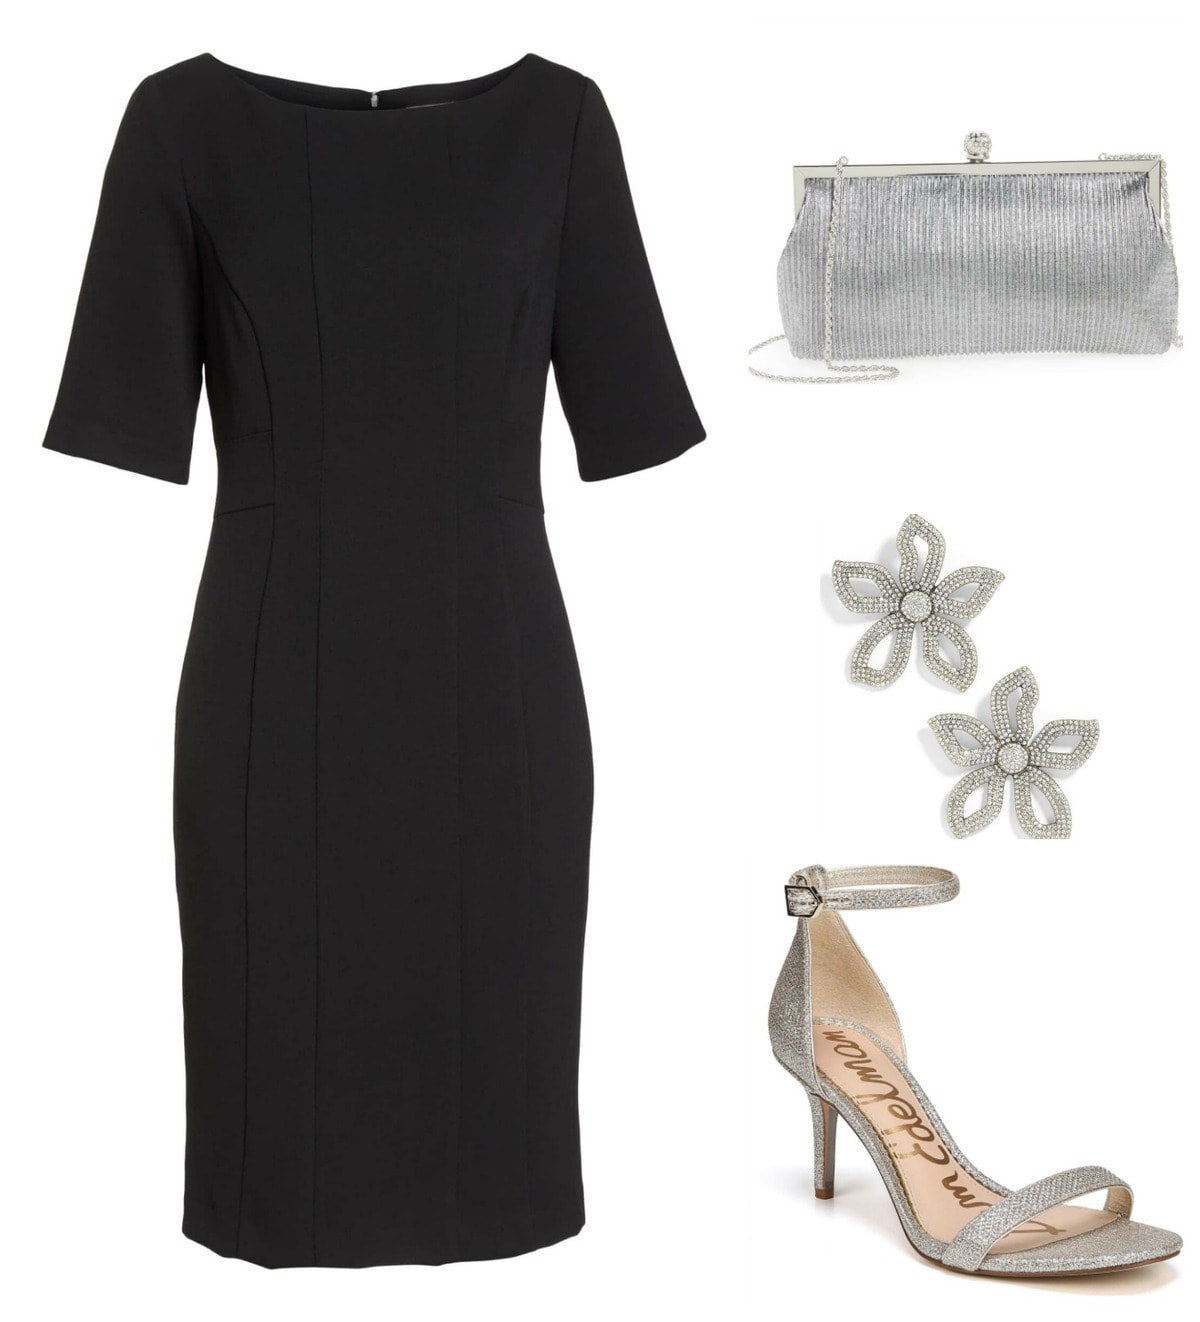 Black with silver makes for an elegant after five ensemble